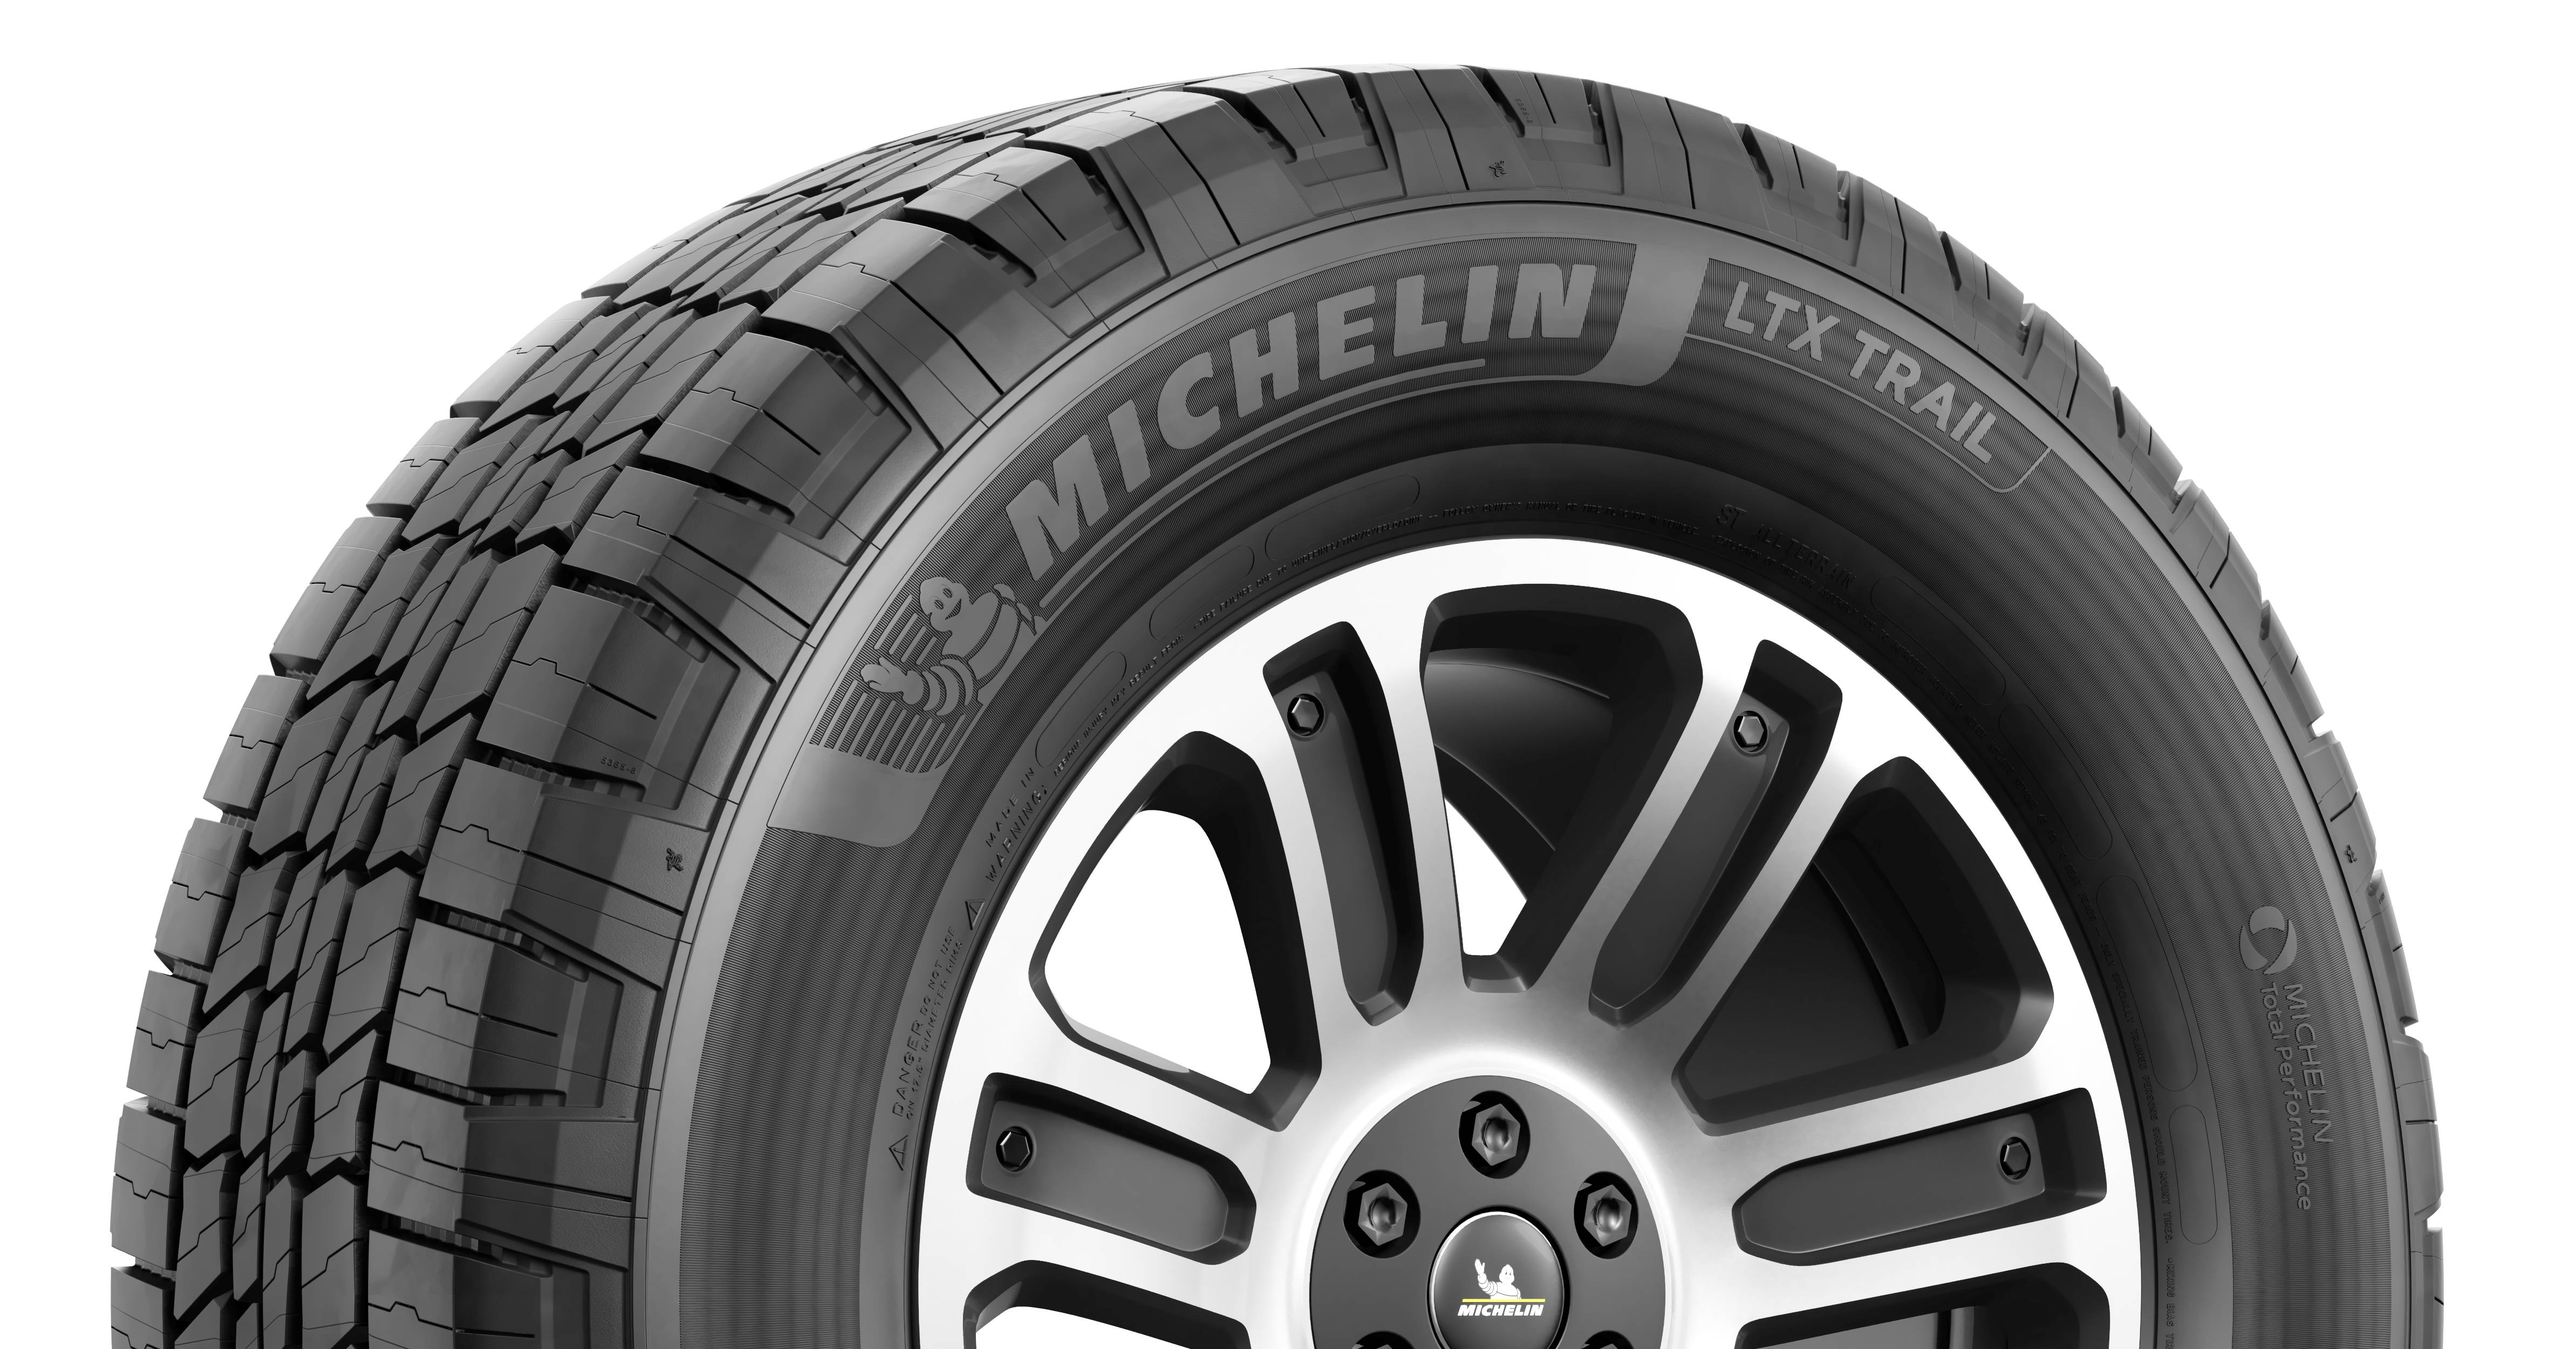 Michelin LTX Trail tyre launched in Malaysia - for pick-up trucks and SUVs;  nine sizes from 15 to 18 inches - paultan.org